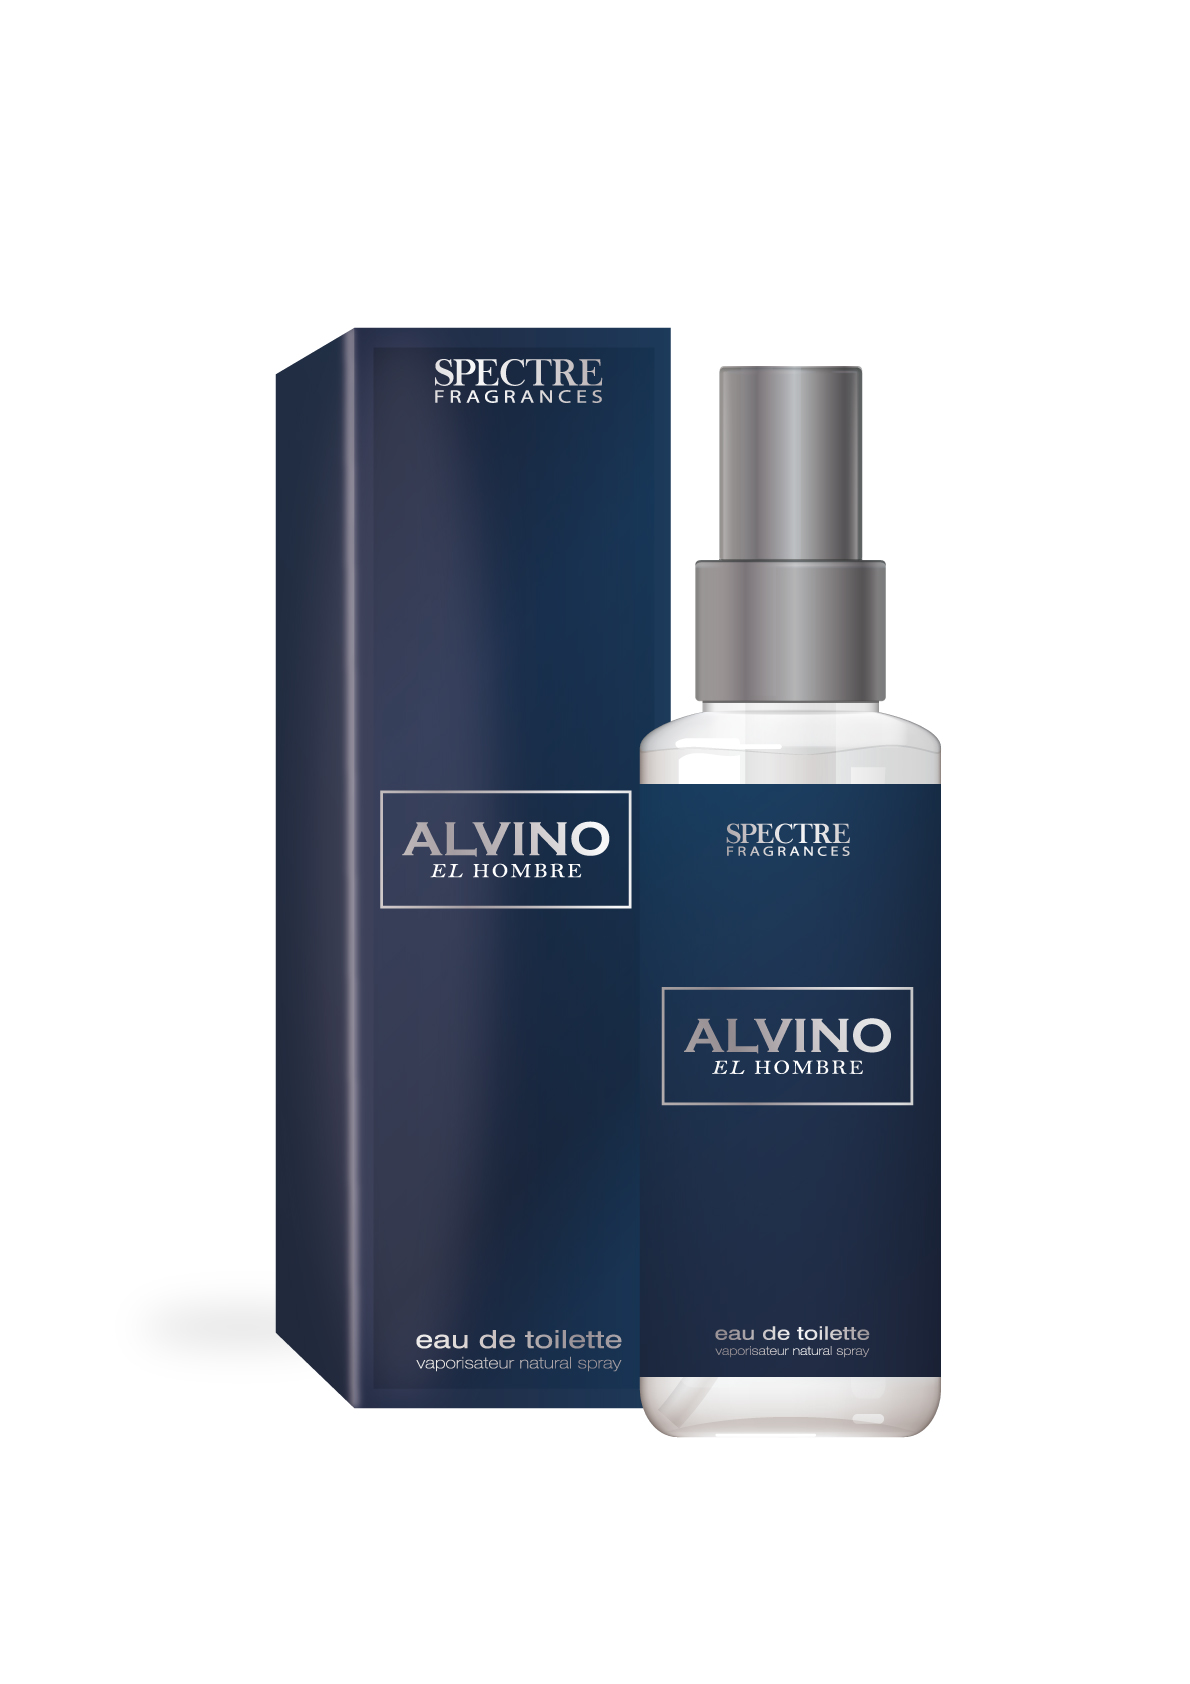 Featured image for “Alvino”